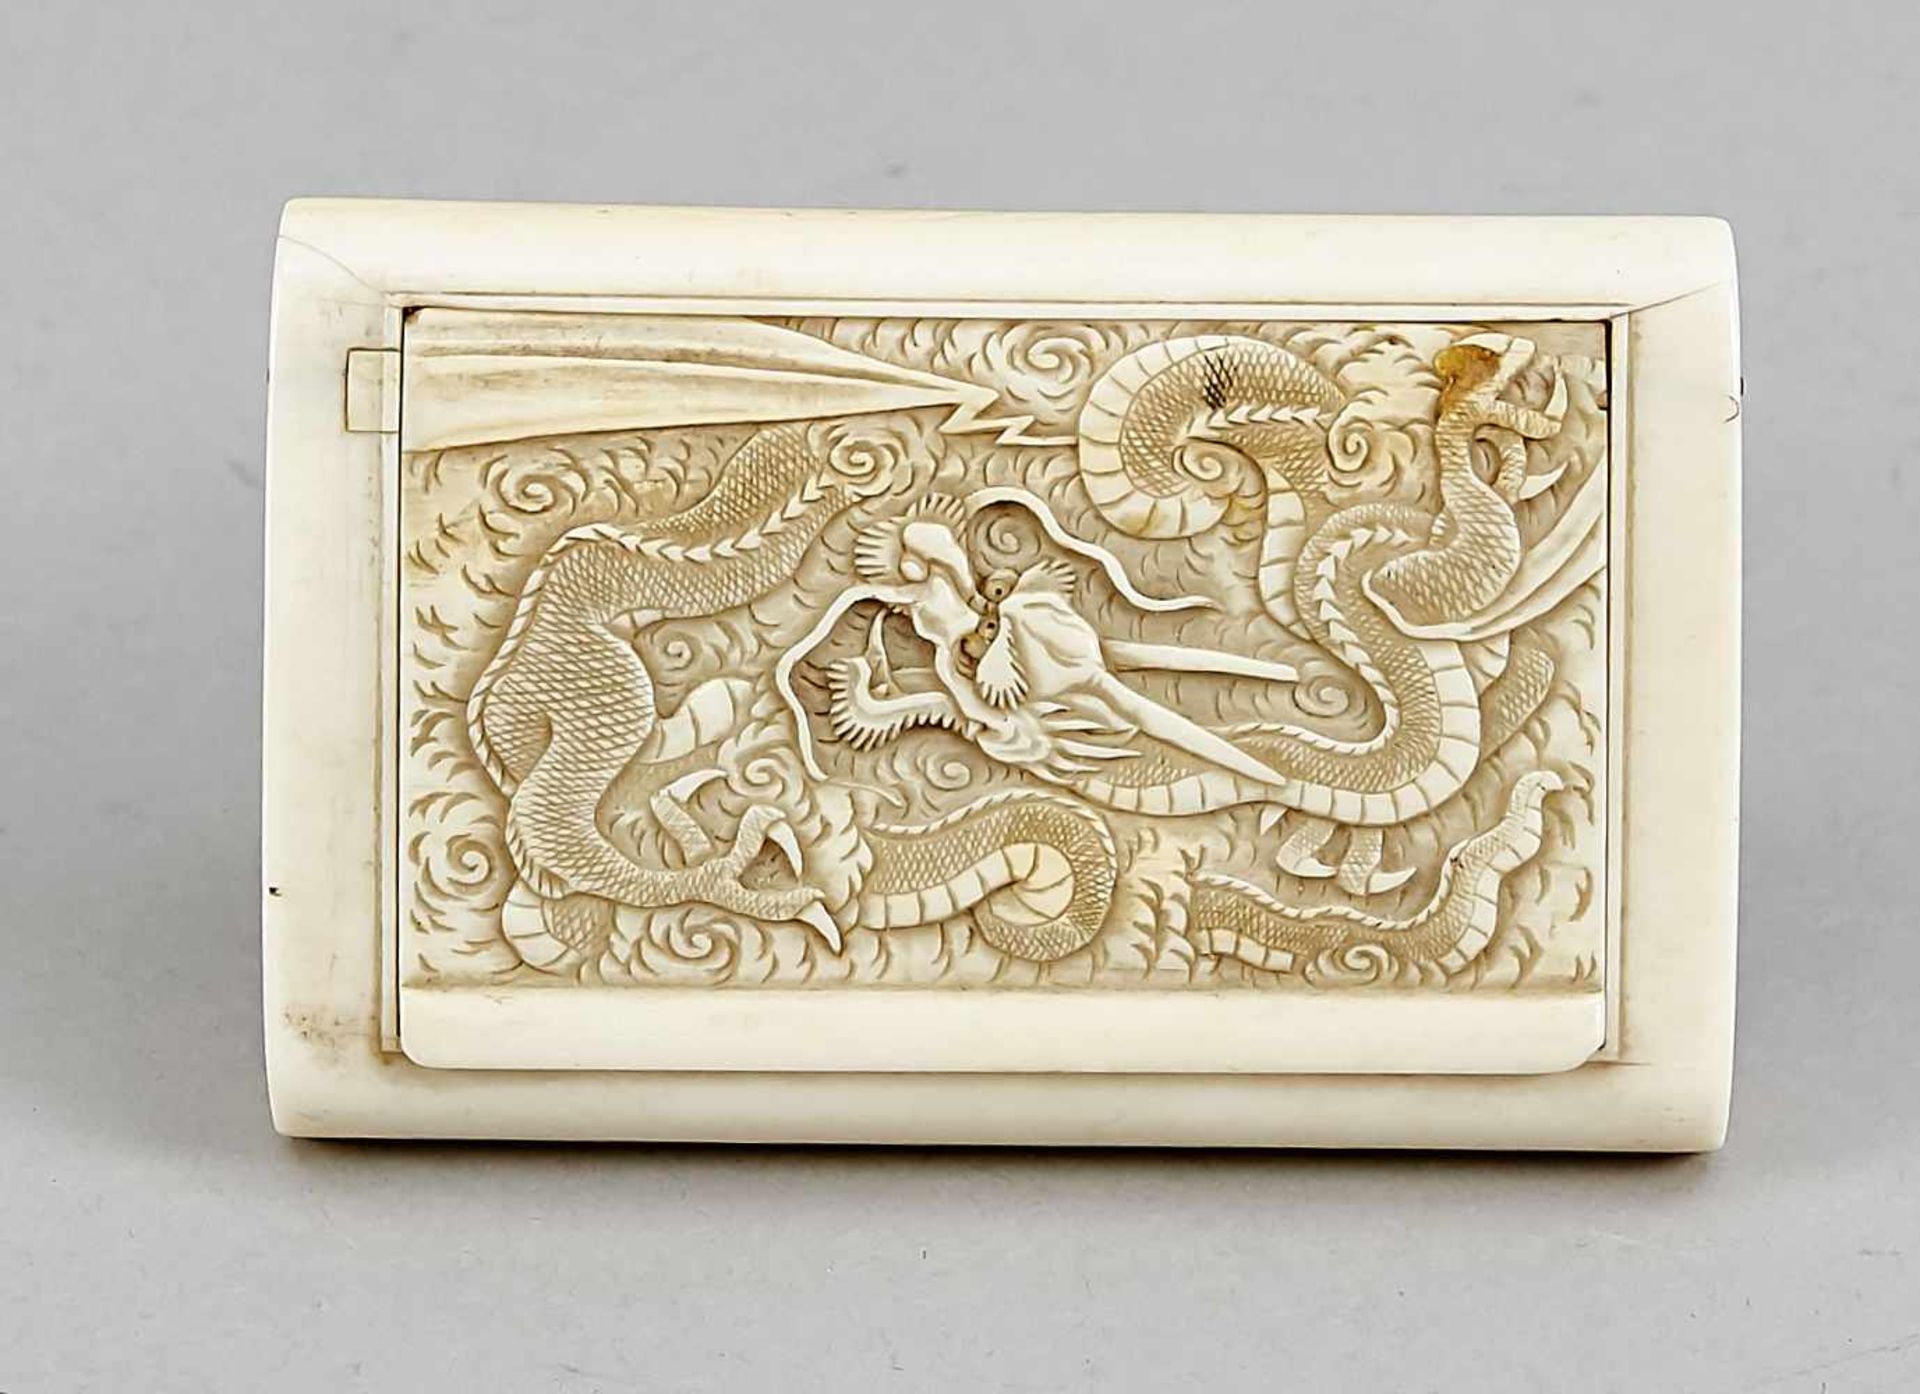 A Japanese ivory cigarette box around 1900 of rectangular shape, the hinged cover carved